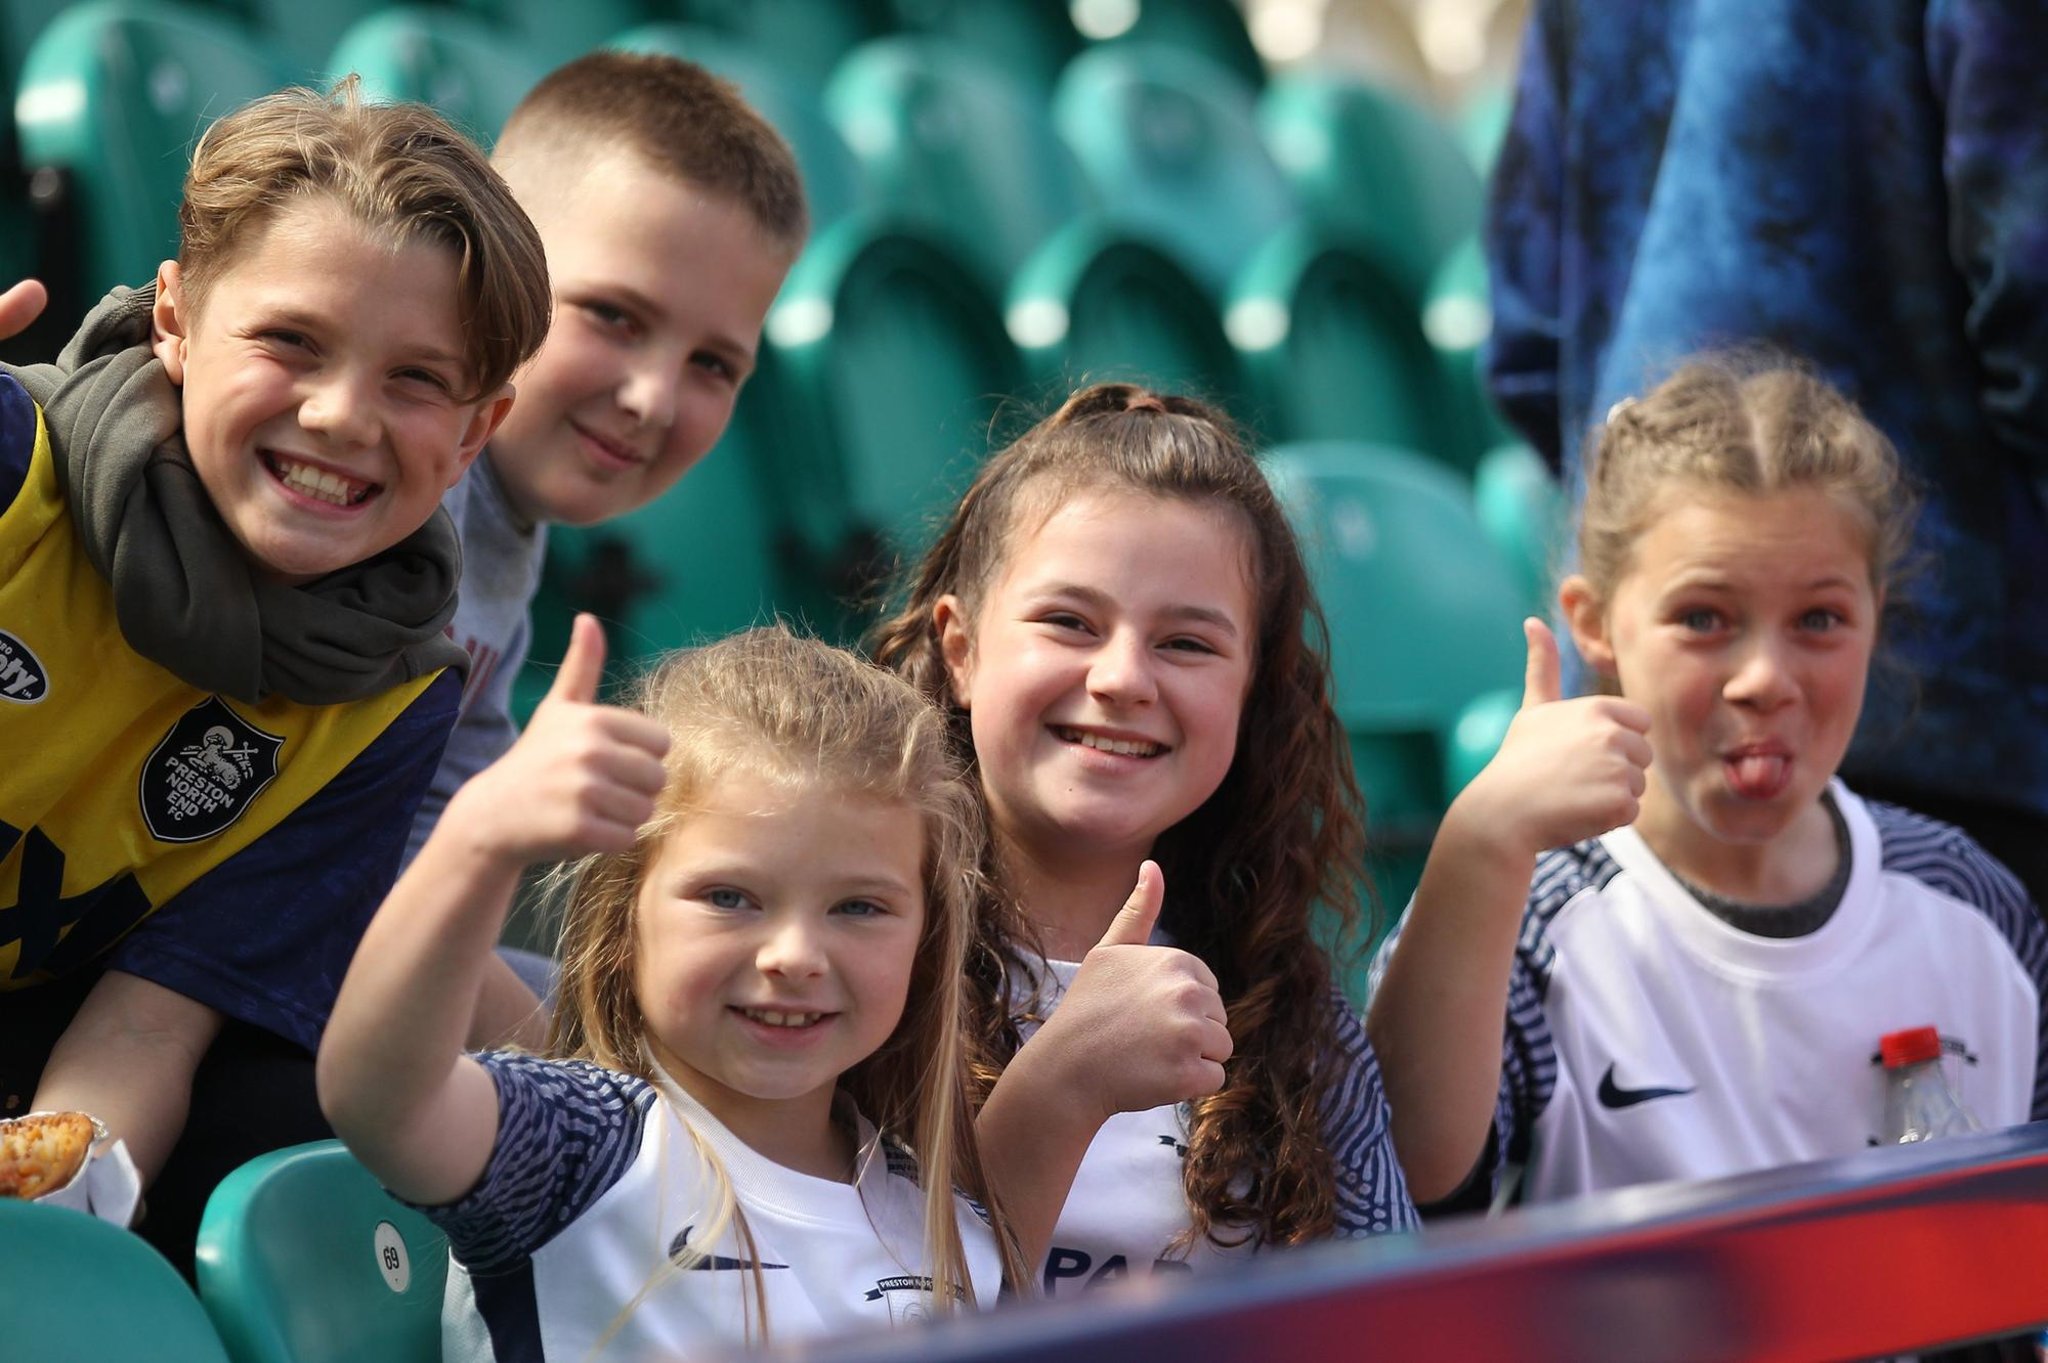 Photo gallery of Preston North End fans from the Middlesbrough game